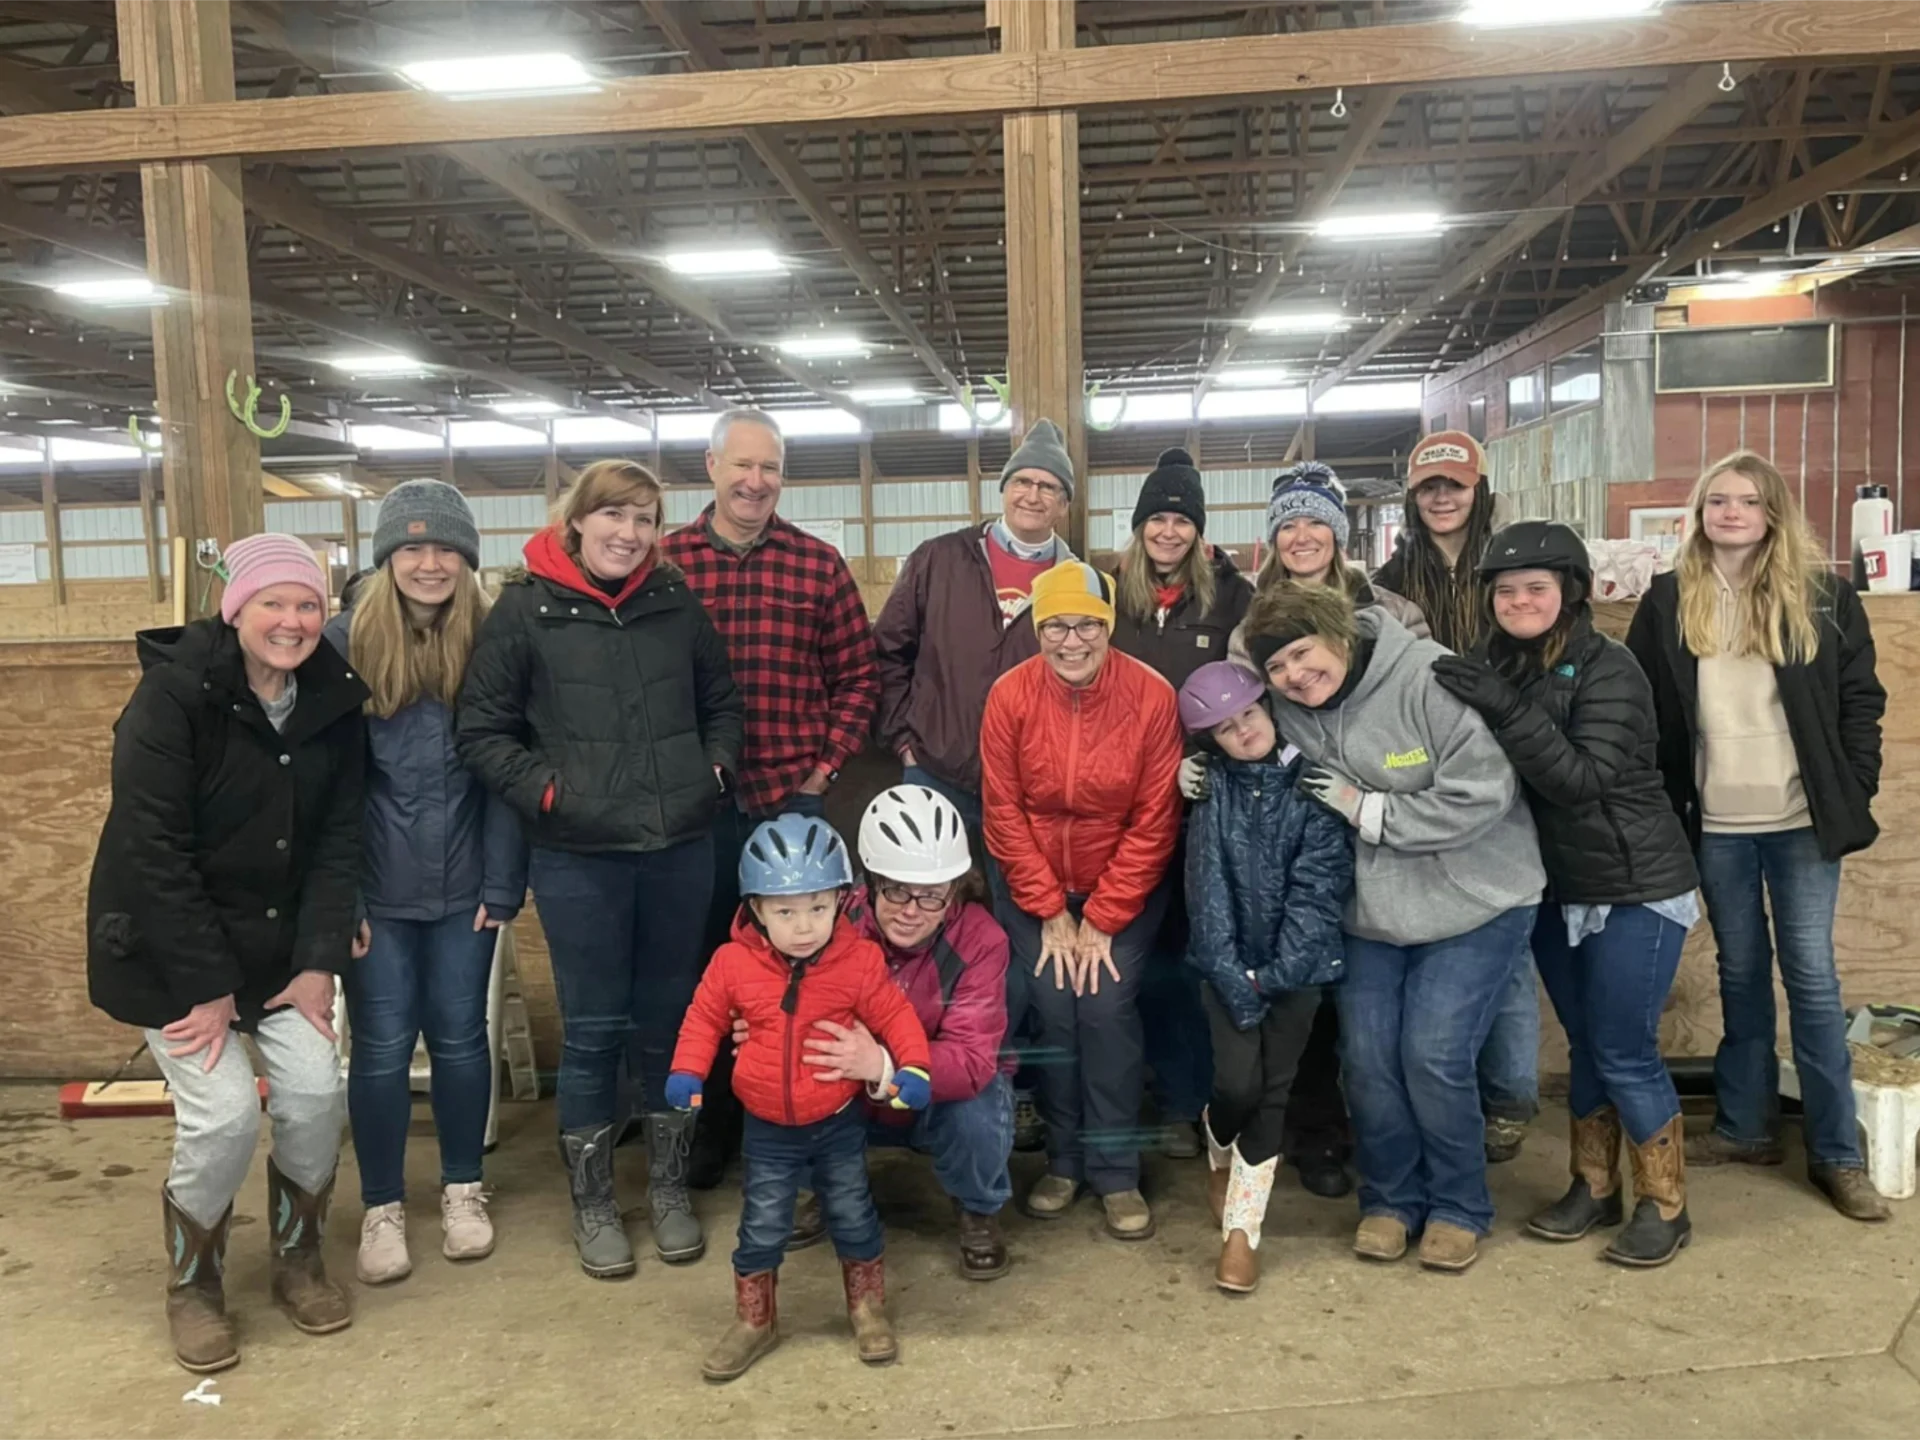 A group of people in the barn with helmets on.